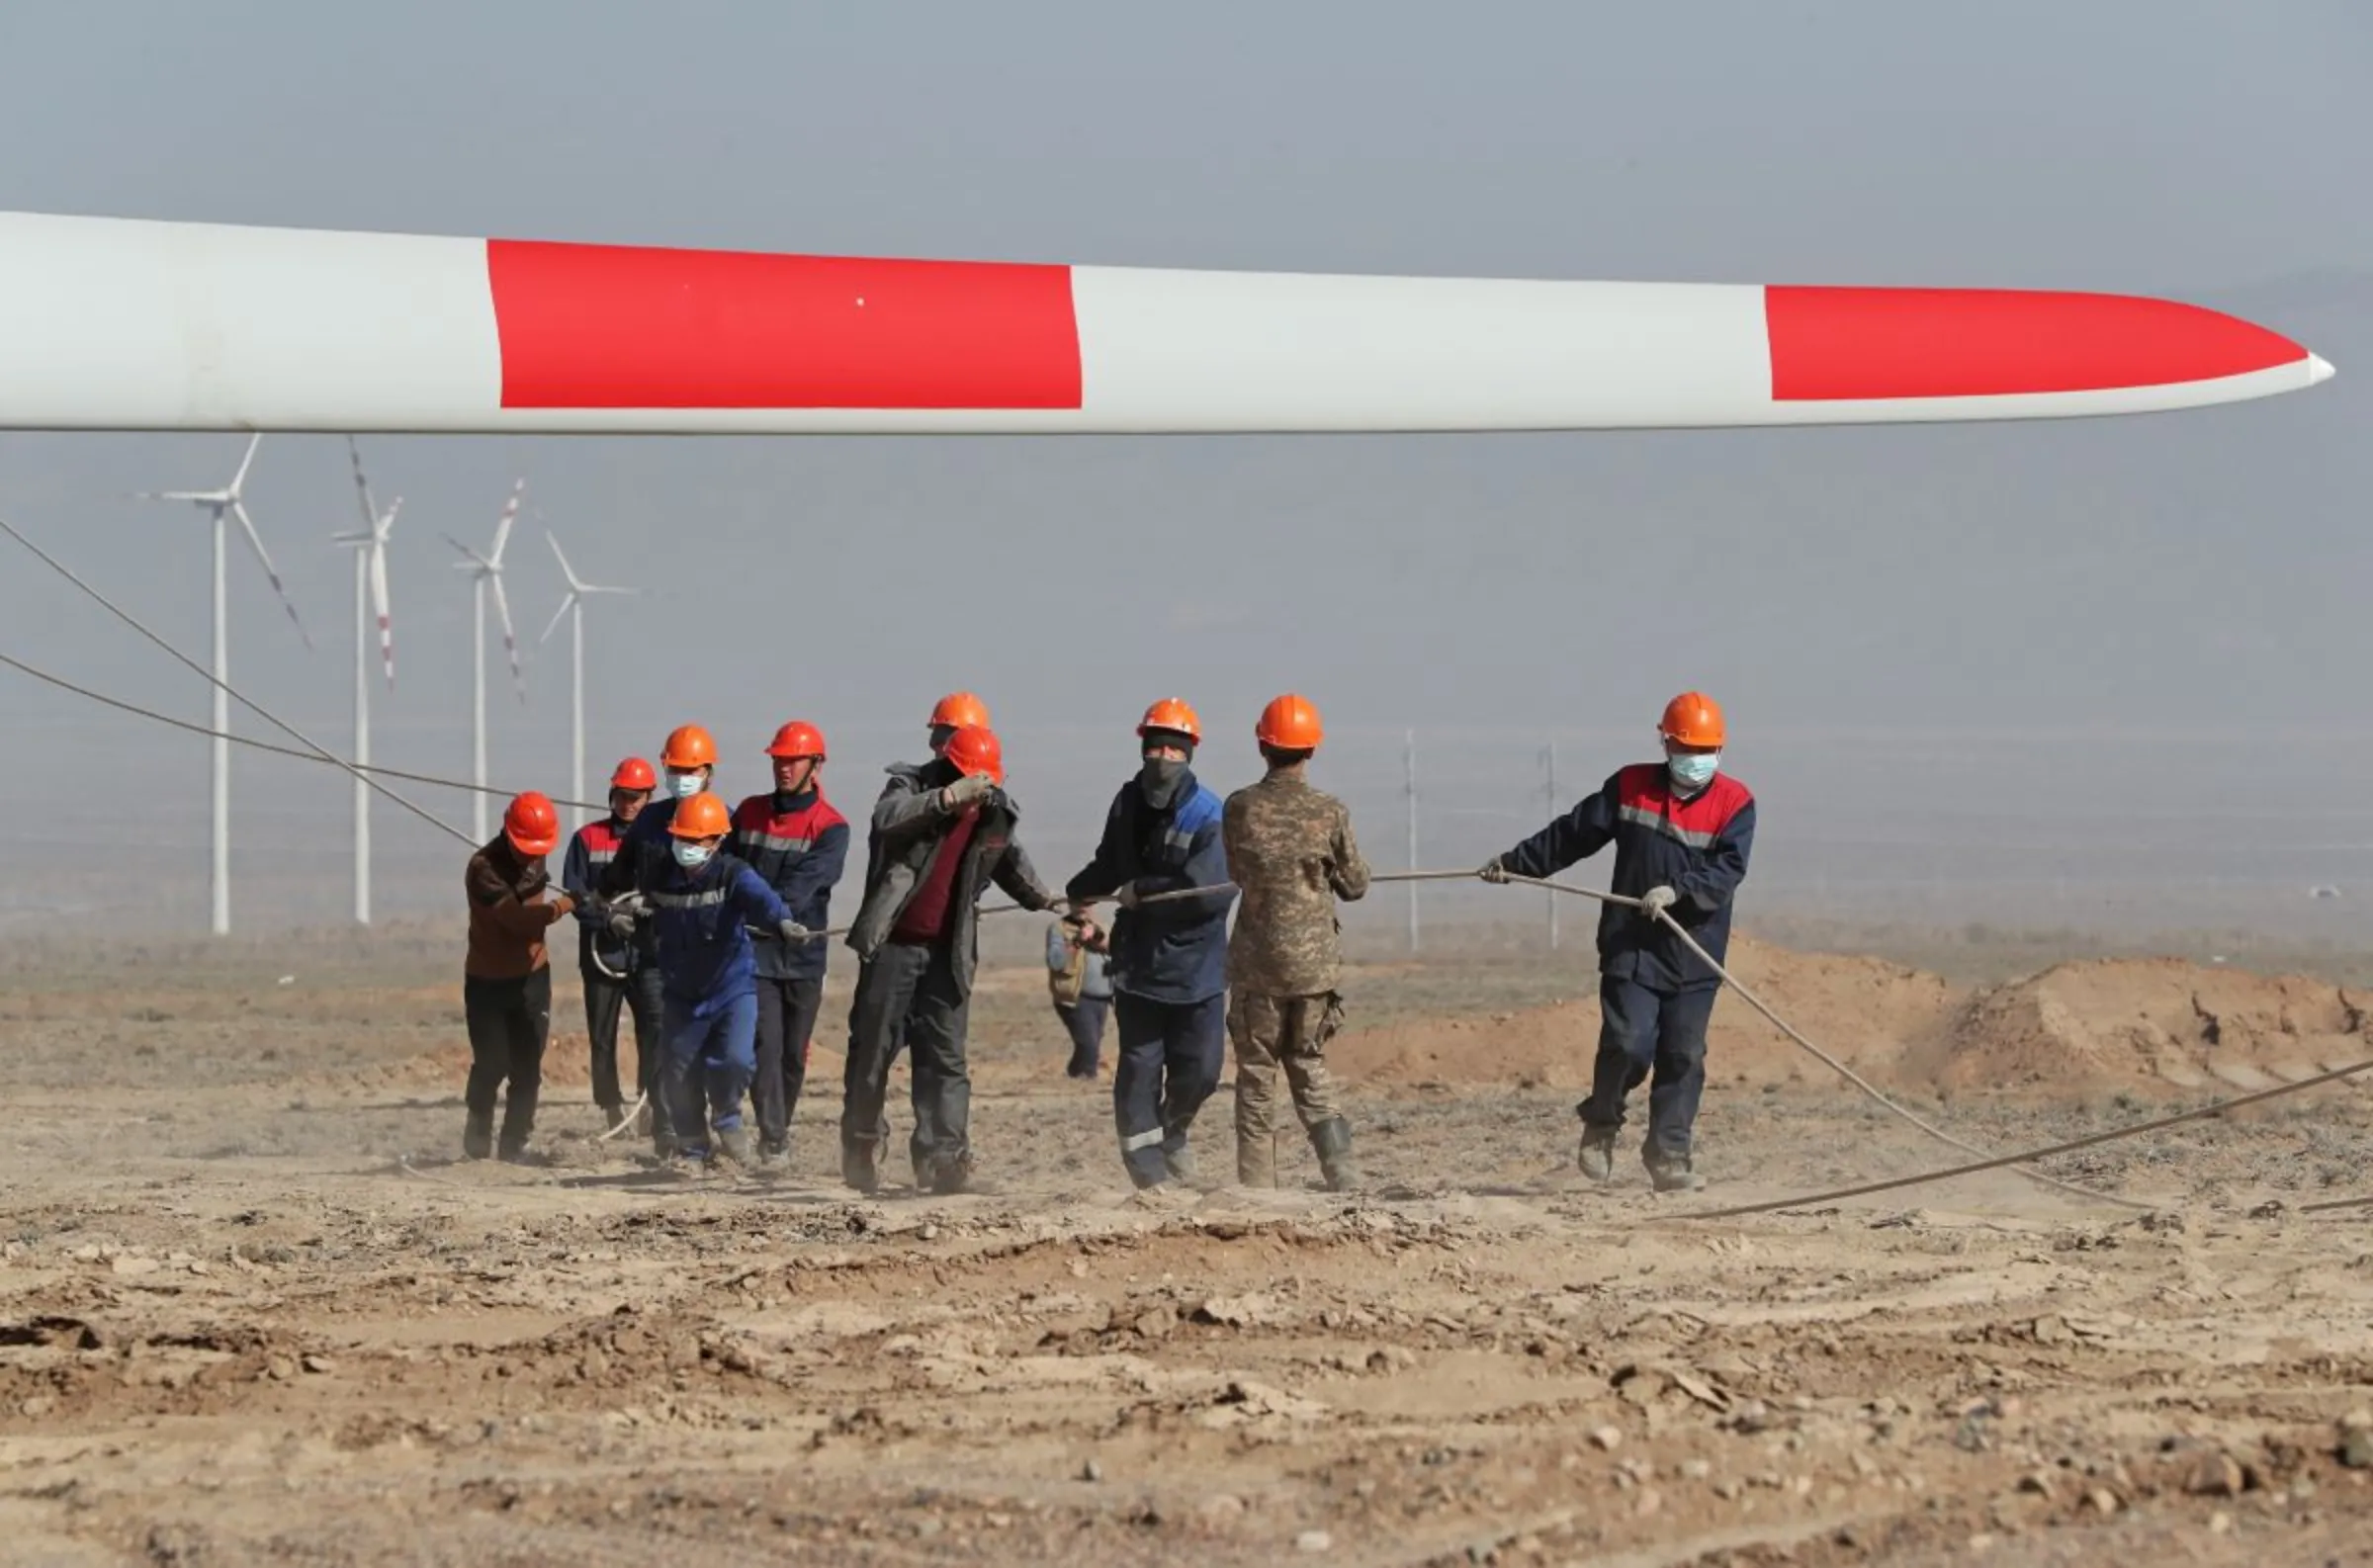 Workers install a rotor blade on a power-generating wind turbine during a construction of a wind farm by Kazakh company Samruk-Energy in cooperation with the Chinese PowerChina Corporation in the Almaty region, Kazakhstan April 7, 2022. REUTERS/Pavel Mikheyev